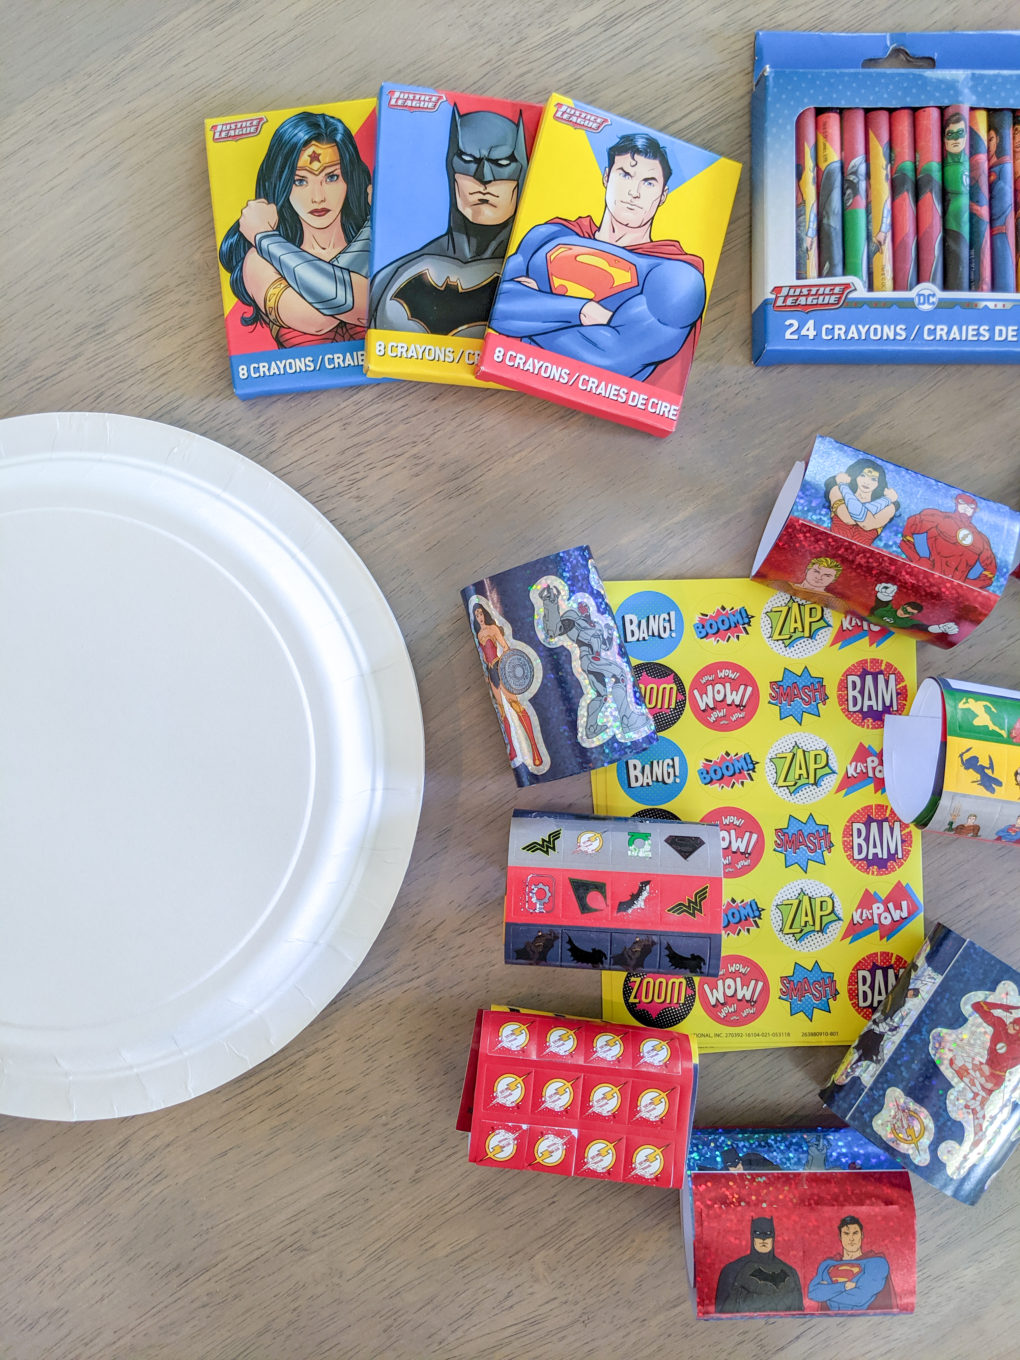 Superhero party activity - make your own shield. Superhero themed birthday party ideas for a toddler party. I'm sharing our cute superhero activities and games, birthday cake, and party favor inspiration.